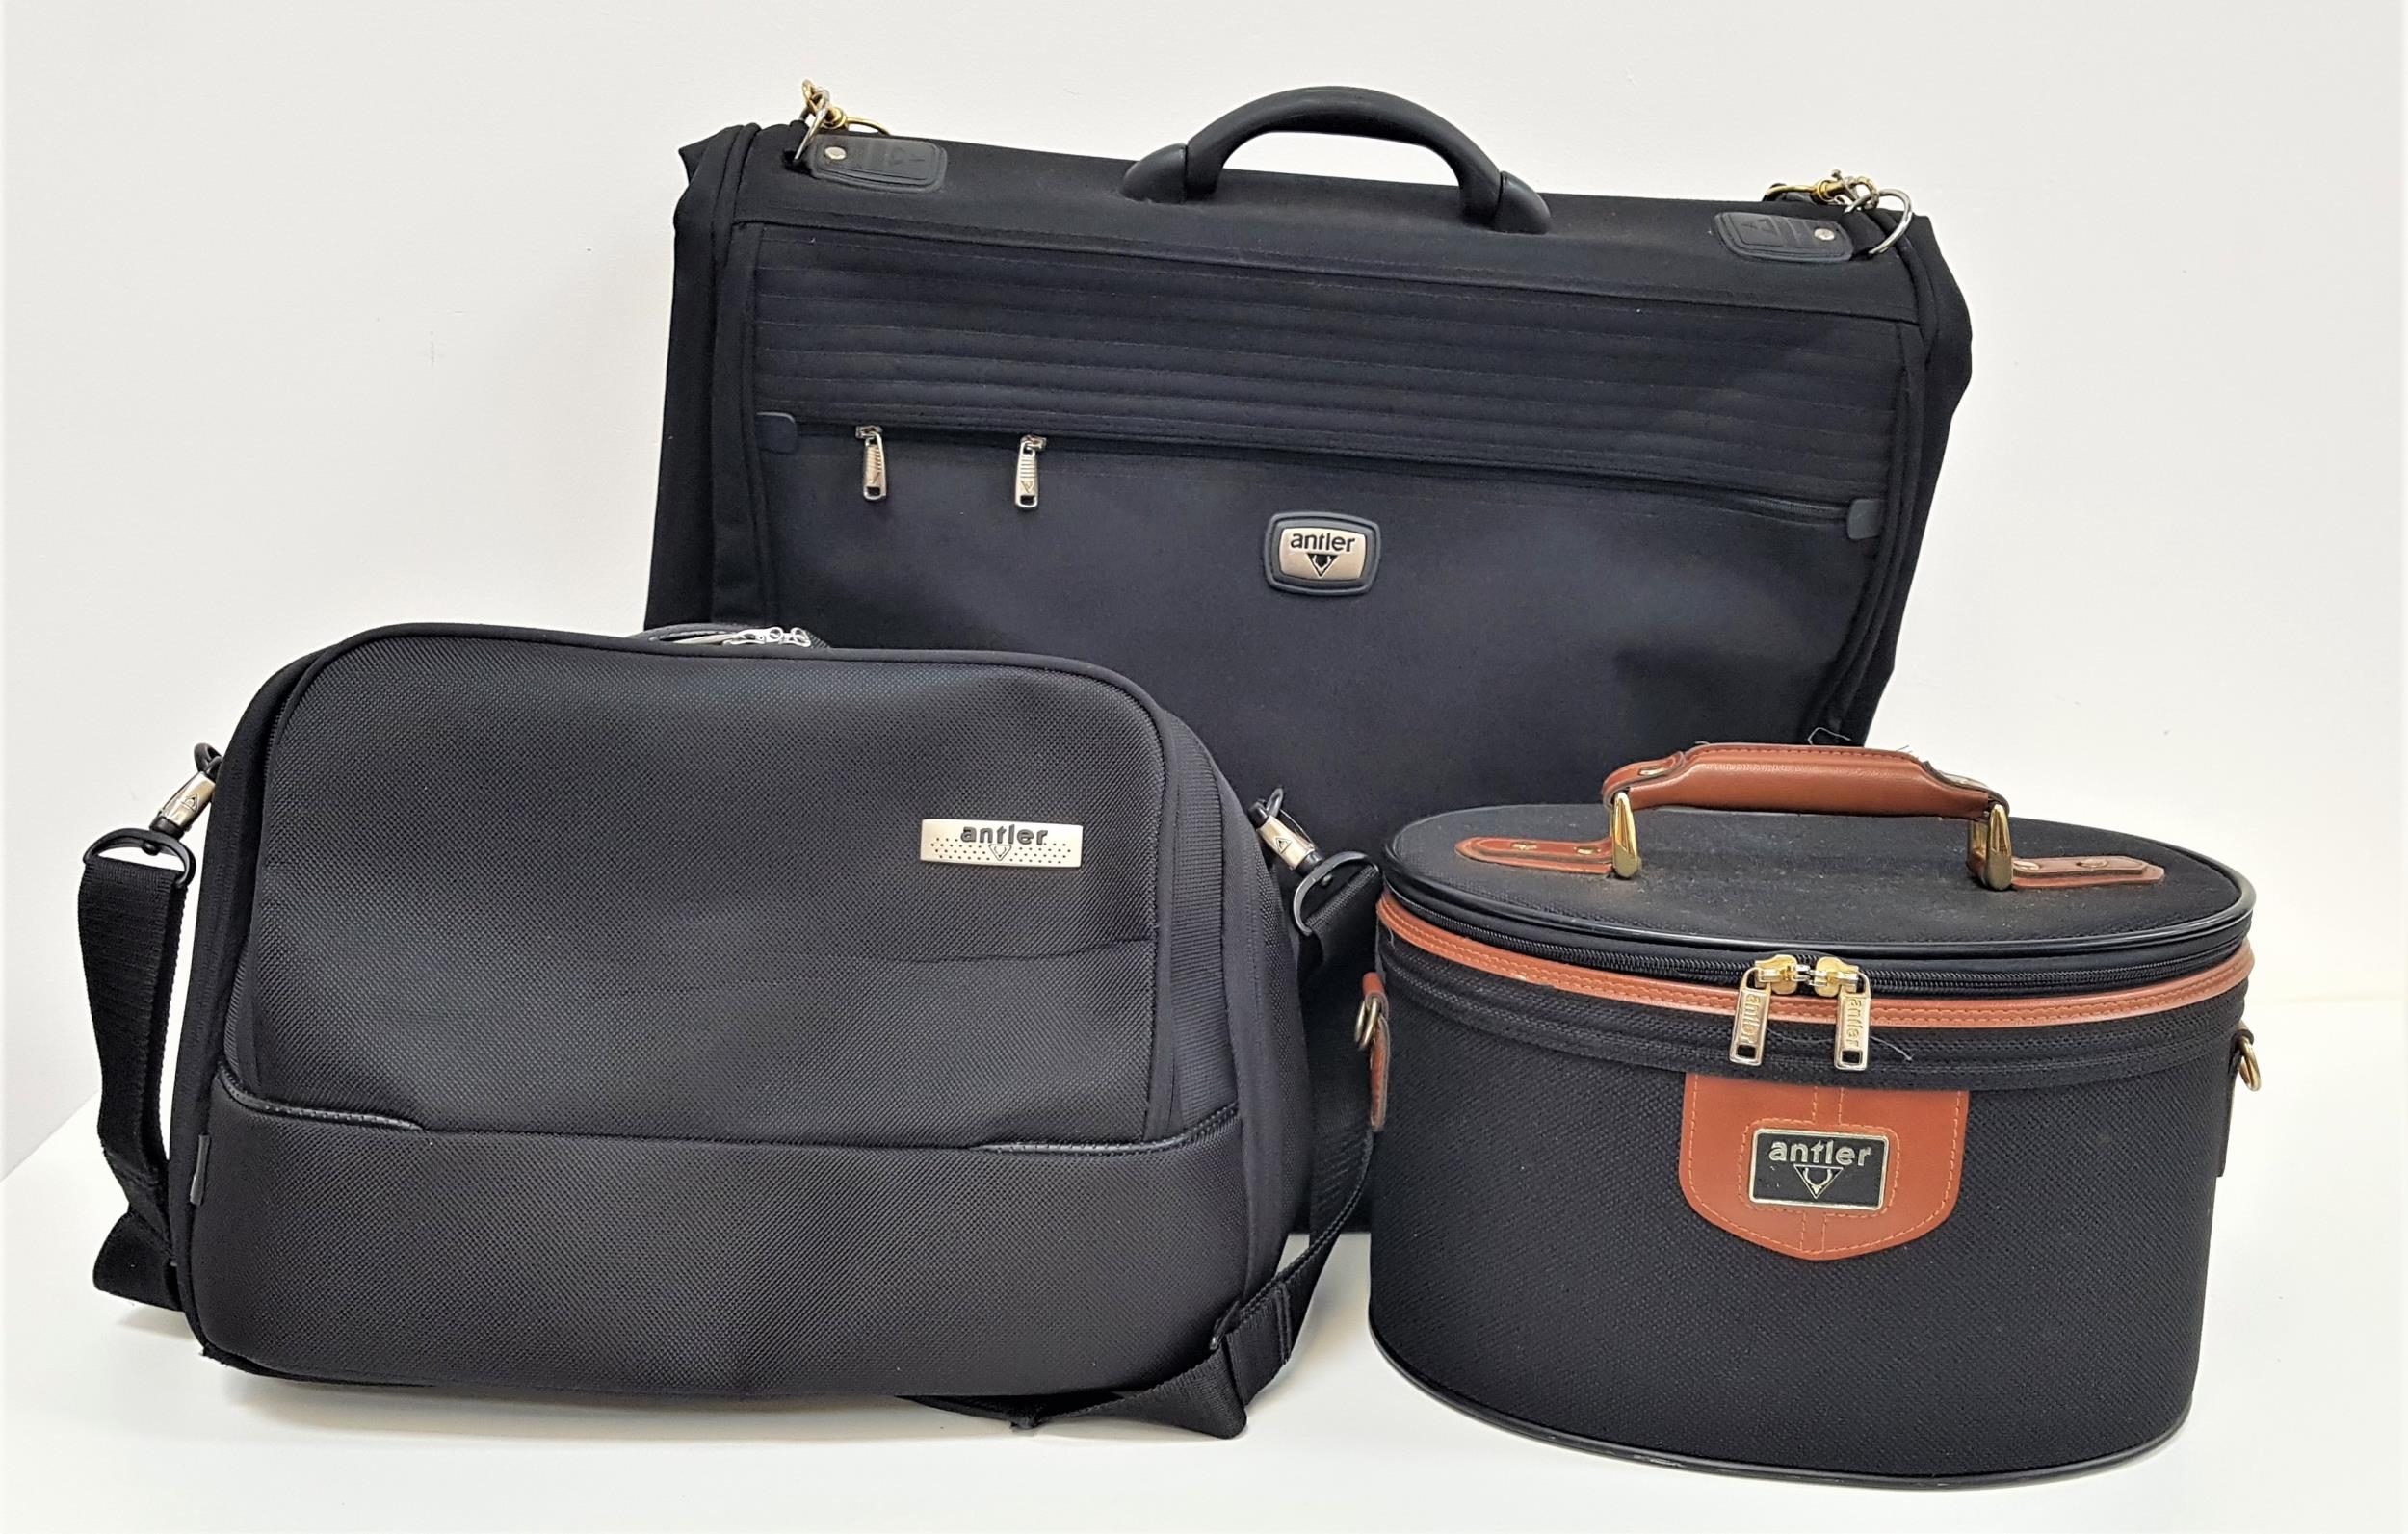 SET OF ANTLER LUGGAGE including a ladies oval jewellery/vanity case, a gents suit/weekend bag and